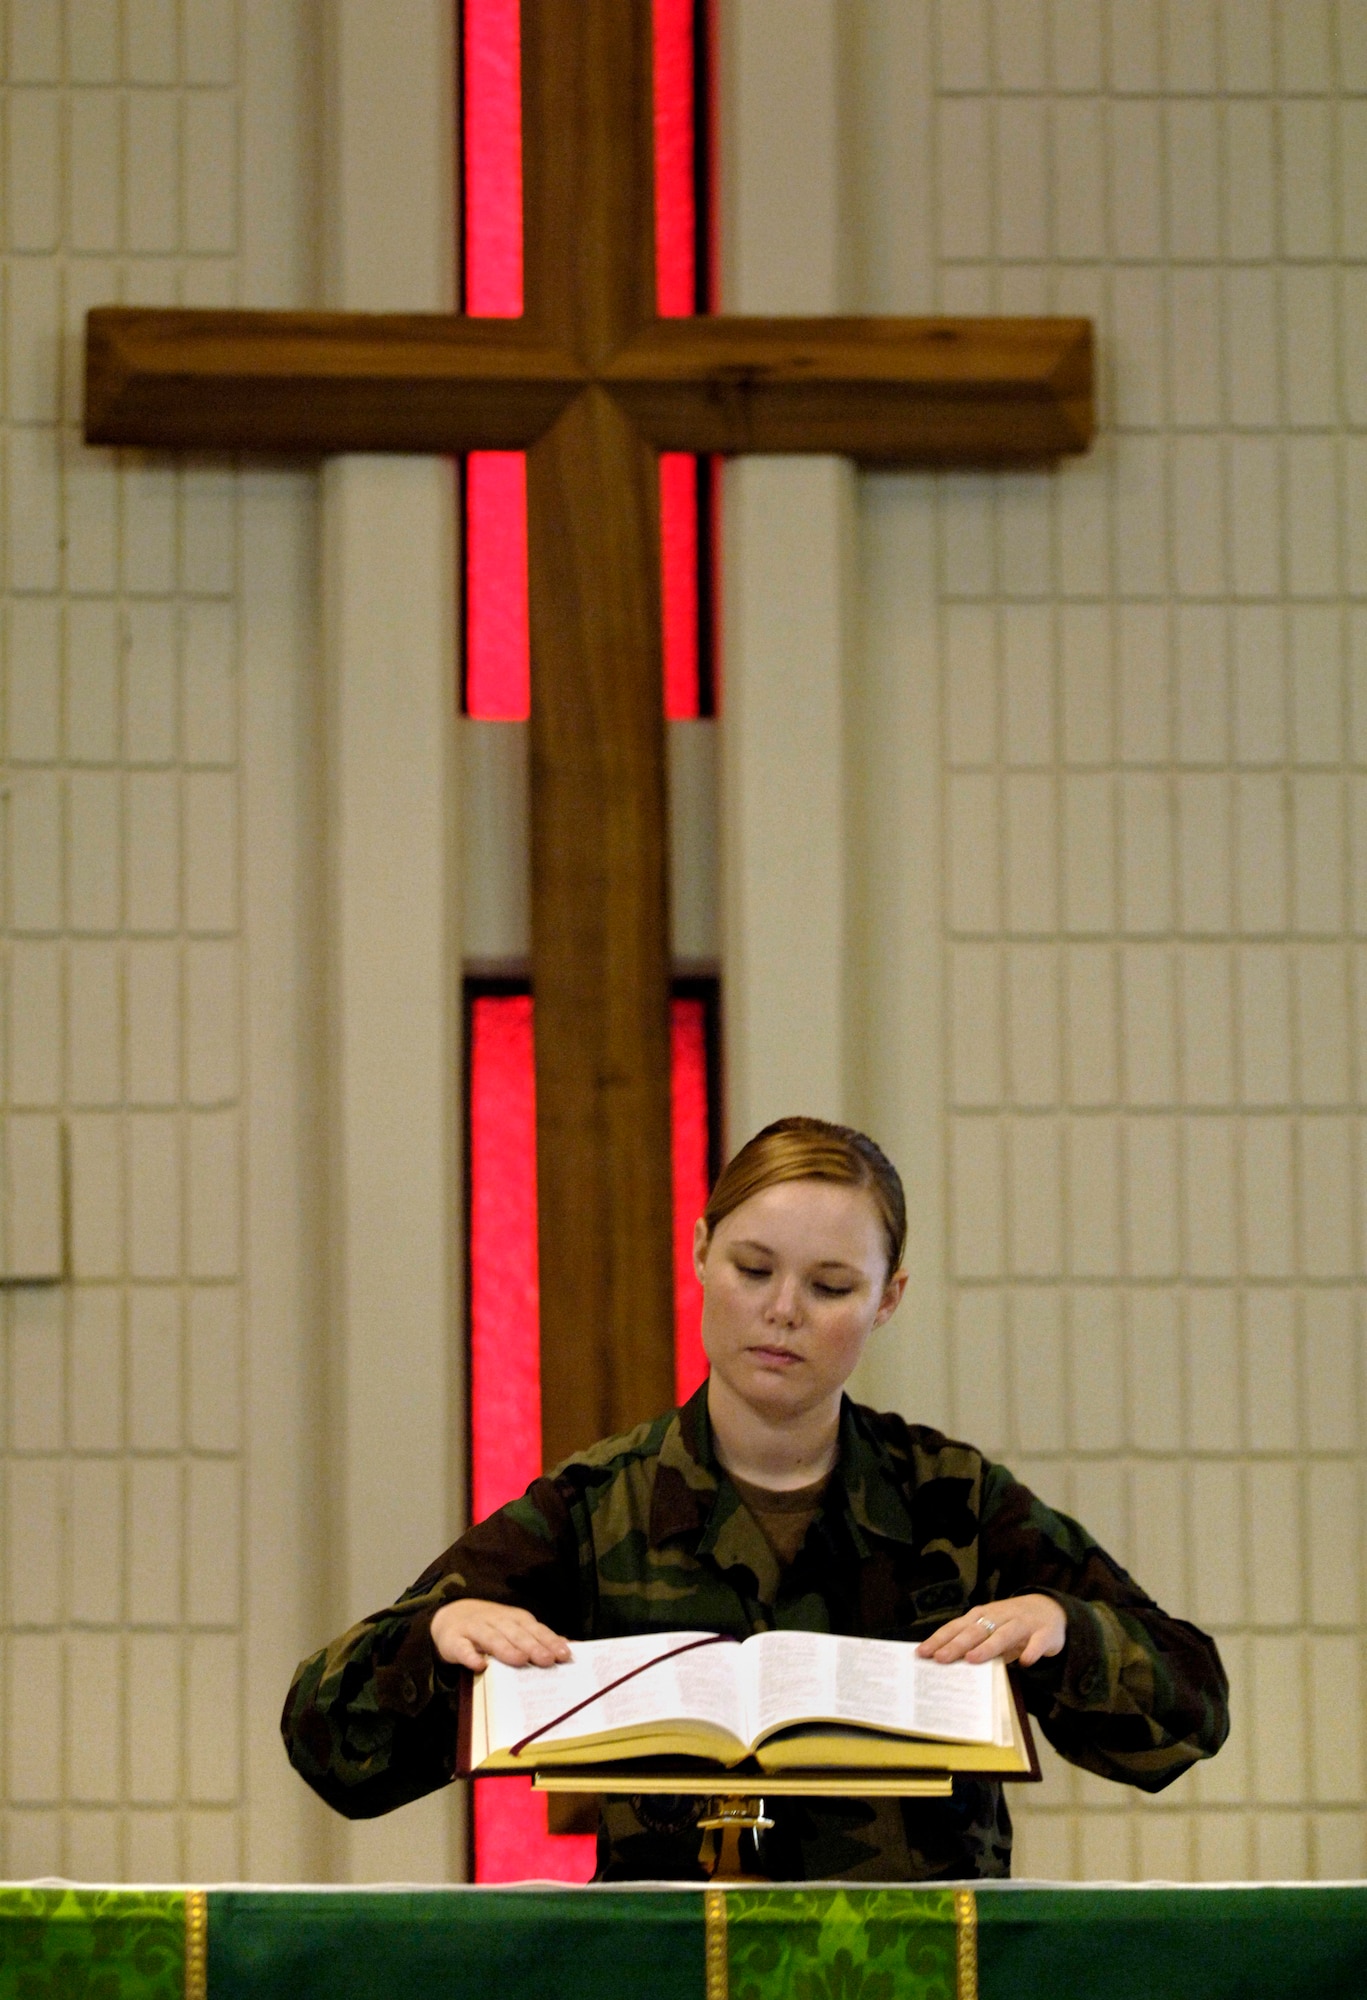 Senior Airman Melissa Harrington places a Bible on the altar of the base chapel at Hickam Air Force Base, Hawaii, Sept. 18. Airman Harrington is a chaplain's assistant for the 15th Airlift Wing. (U.S. Air Force photo/Tech. Sgt. Shane A. Cuomo)
